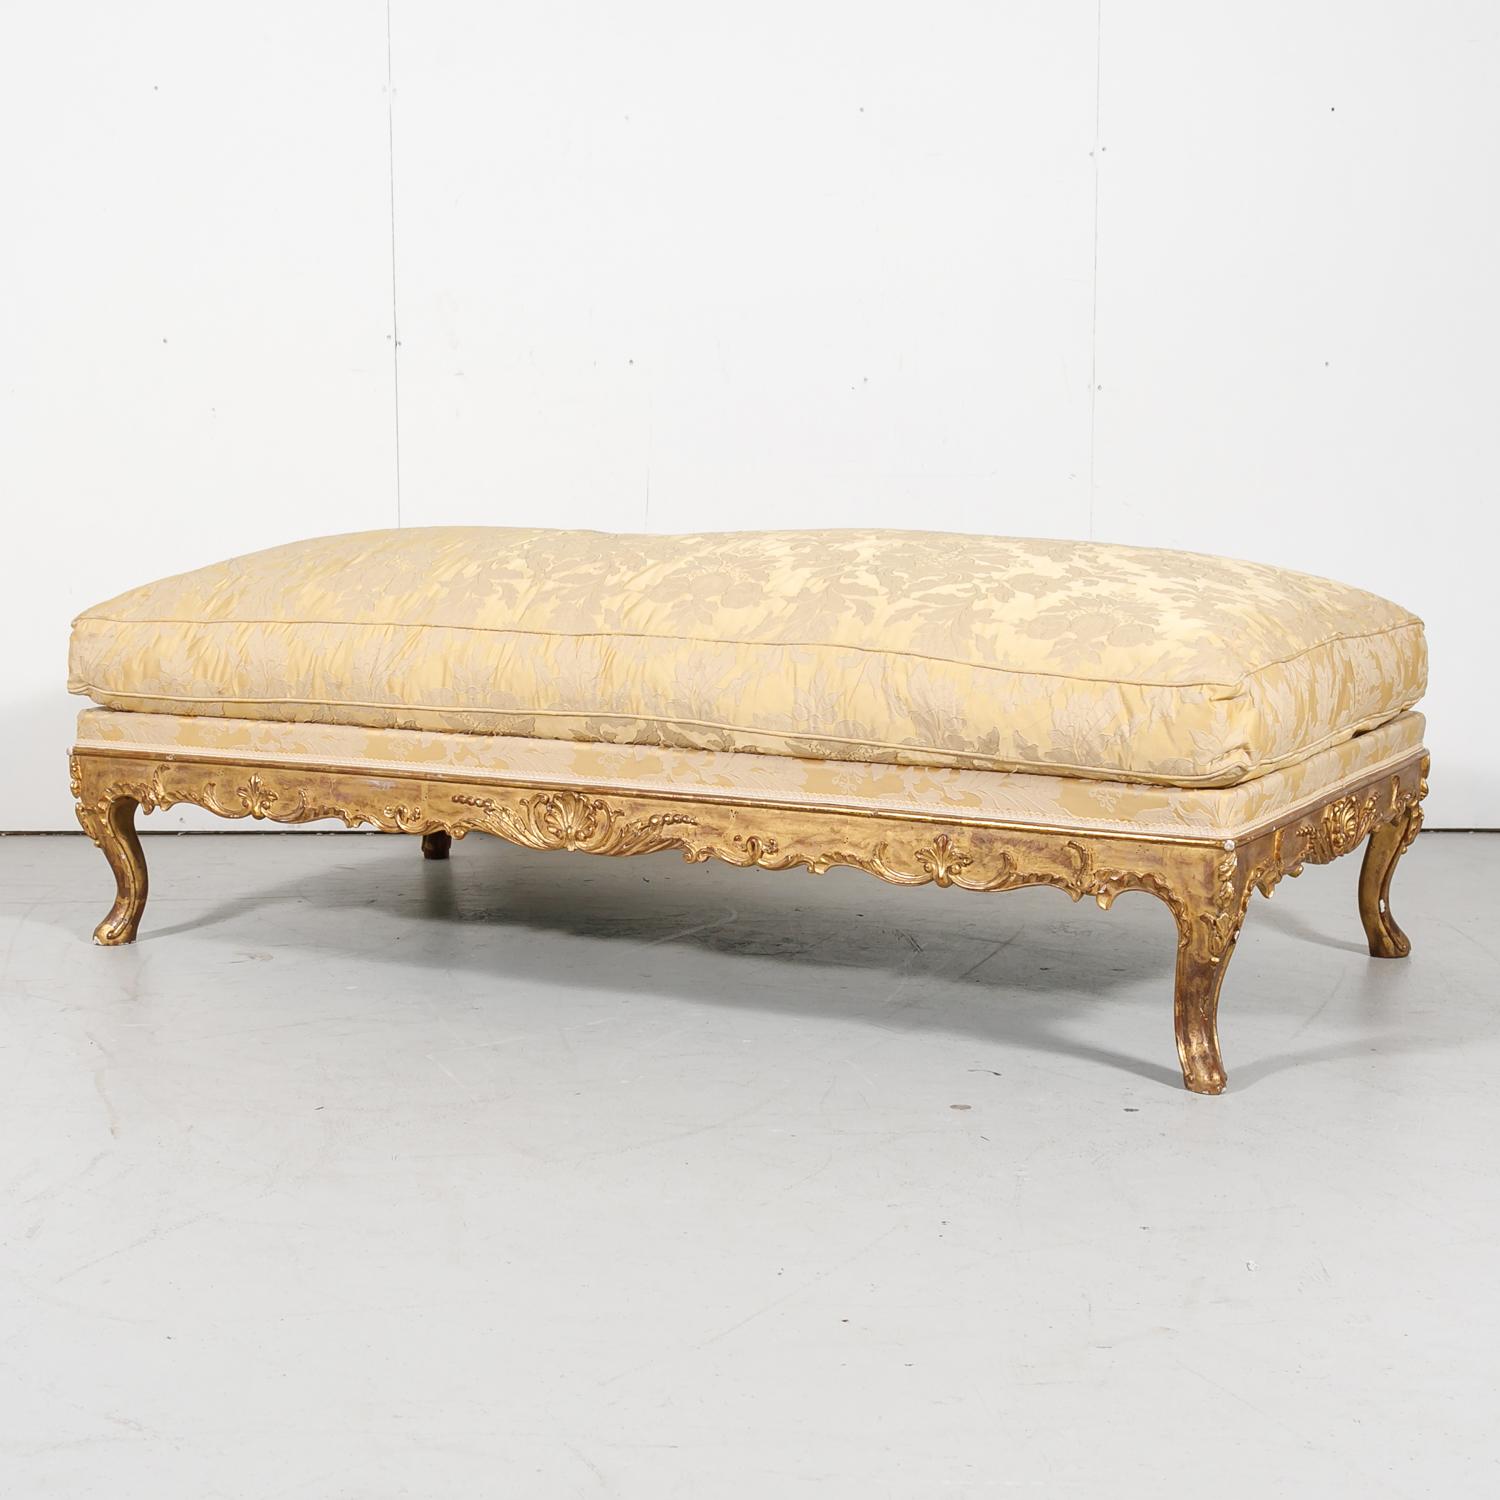 Appliqué Fine 19th Century Louis XV Style Giltwood Bench or Banquette with Loose Cushion